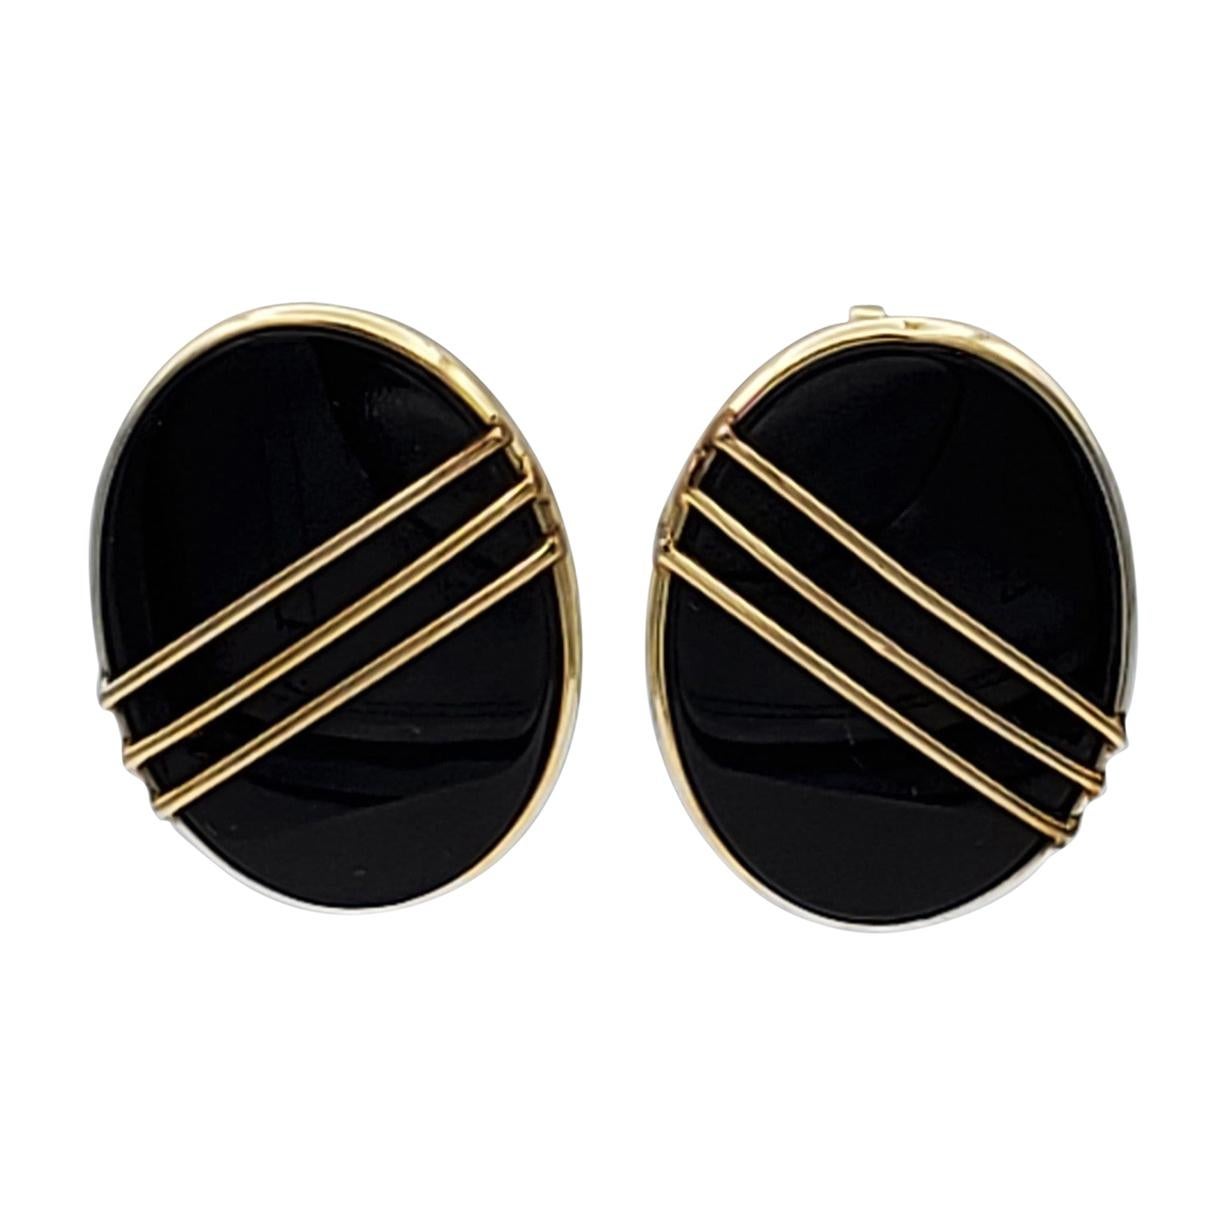 Designer 14 Karat Yellow Gold Friction Post Earrings with Oval Black Onyx Inlay For Sale